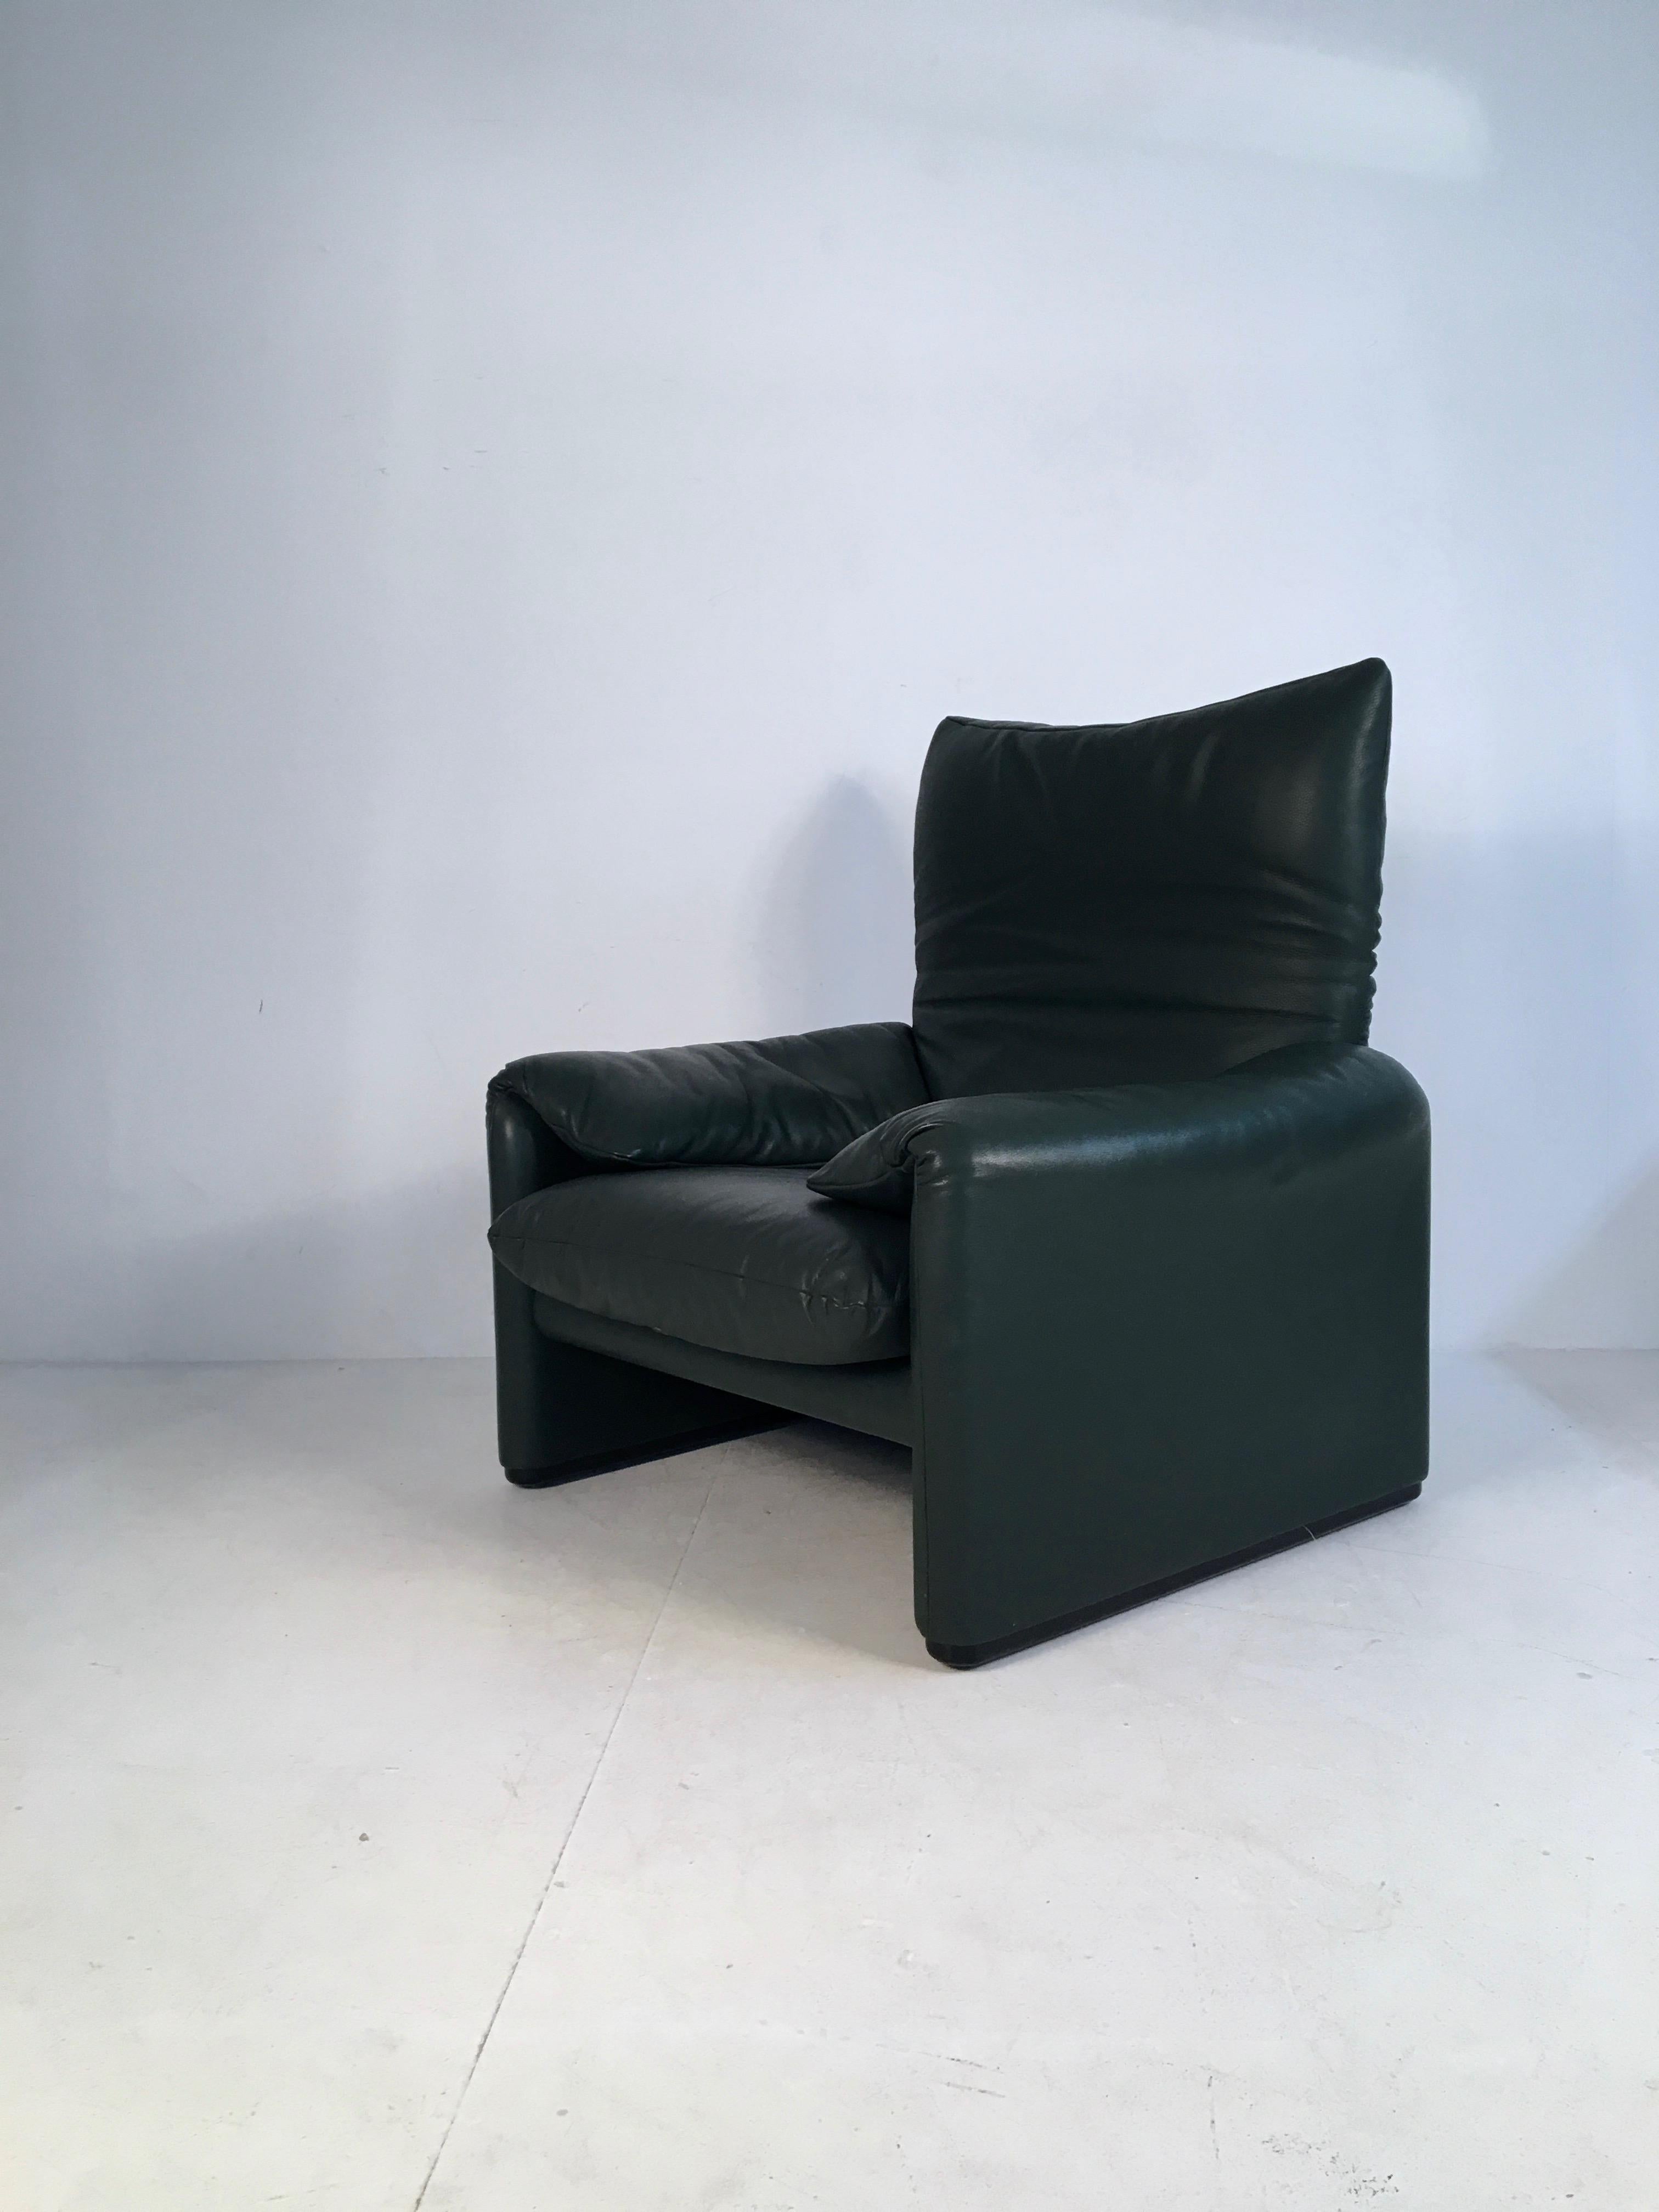 Pair of Green Leather 'Maralunga' Lounge Chairs by Magistretti for Cassina 3